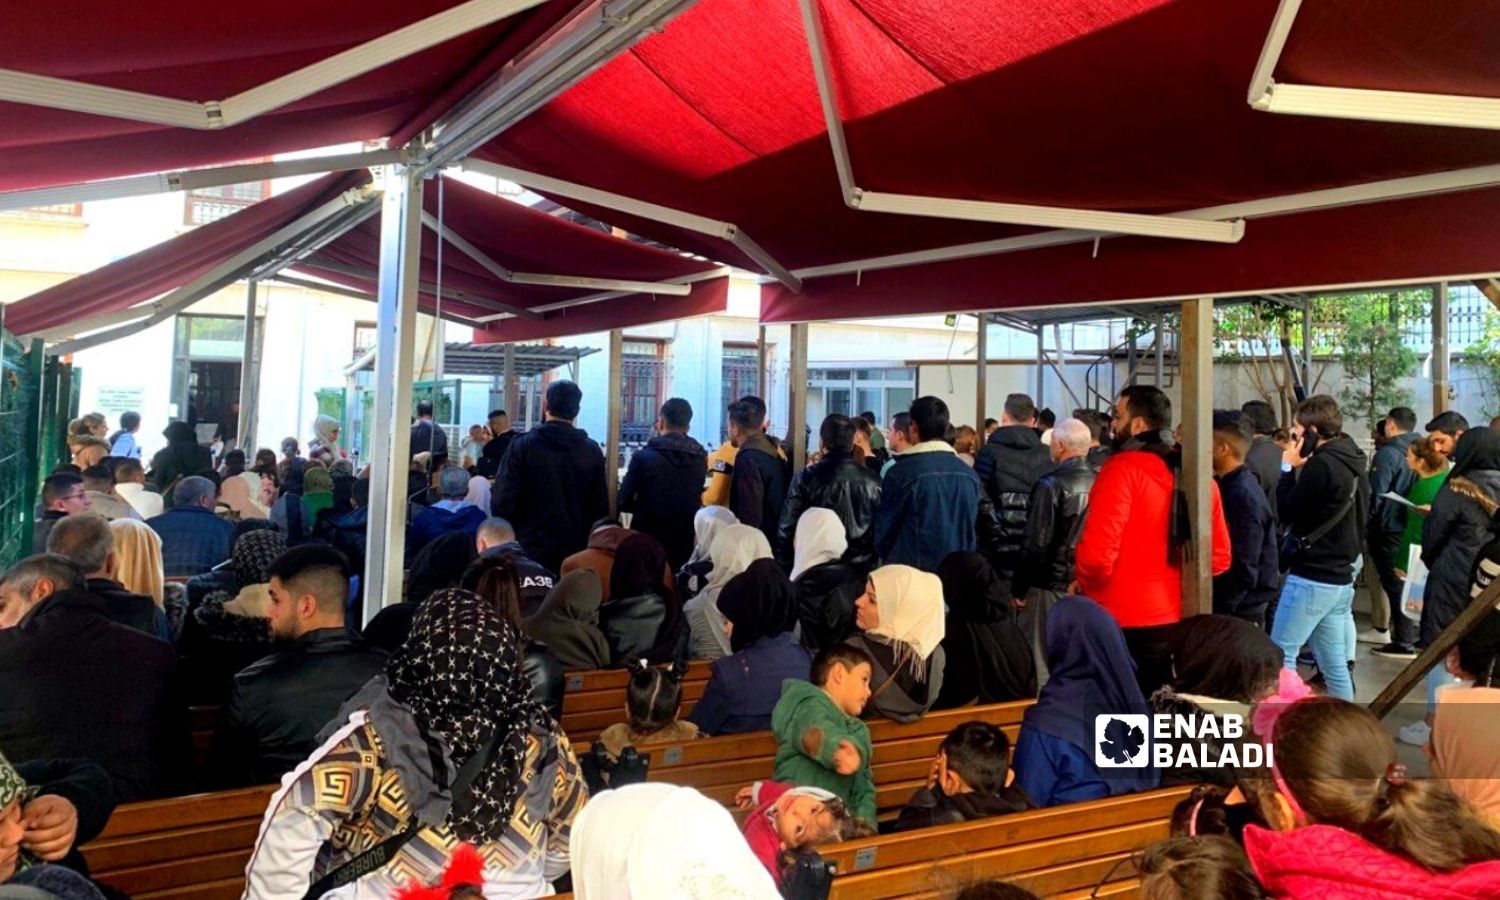 Syrians waiting in the line designated for Kimlik transactions in the courtyard of the Istanbul Immigration Department - 11 November 2022 (Enab Baladi)